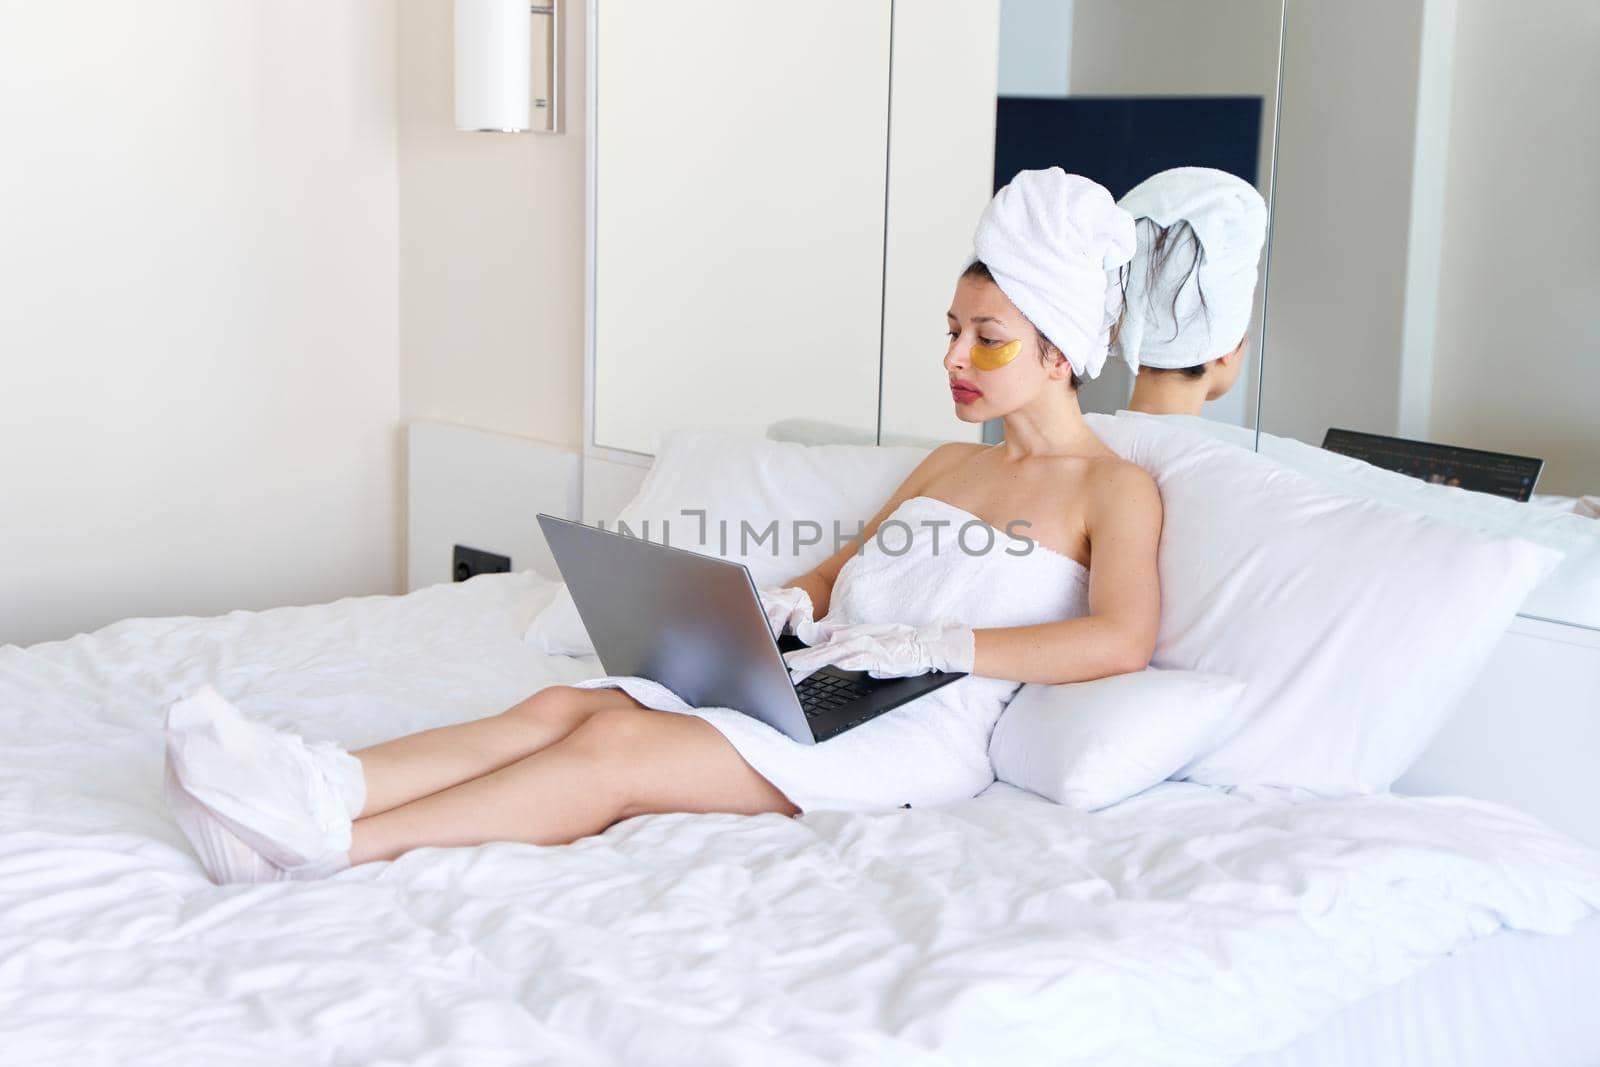 After a shower, a girl wrapped in a towel works on a laptop and uses cosmetic patches for the skin under the eyes, lips and gloves to moisturize her hands and feet. Cosmetic trends for body care at home.